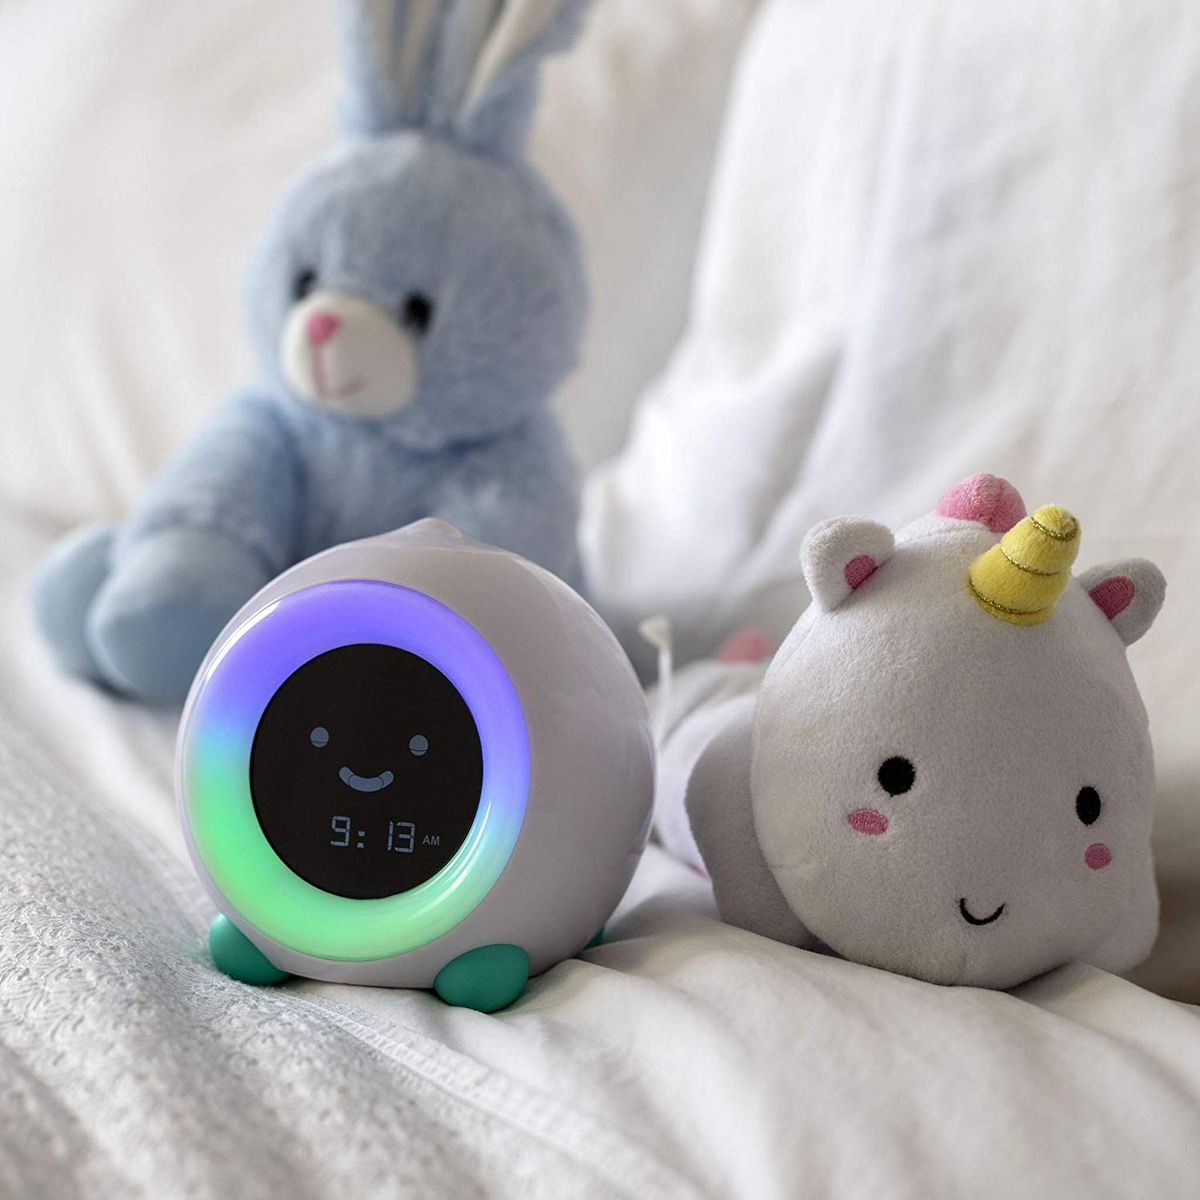 Musical Rattles Toy with Night Lights for Babies,Hand Grip Talking Toys for 0 3 6 9 12 Month Newborn Toddler Infant TUMAMA Rabbit Gifts Baby Sleep Soother